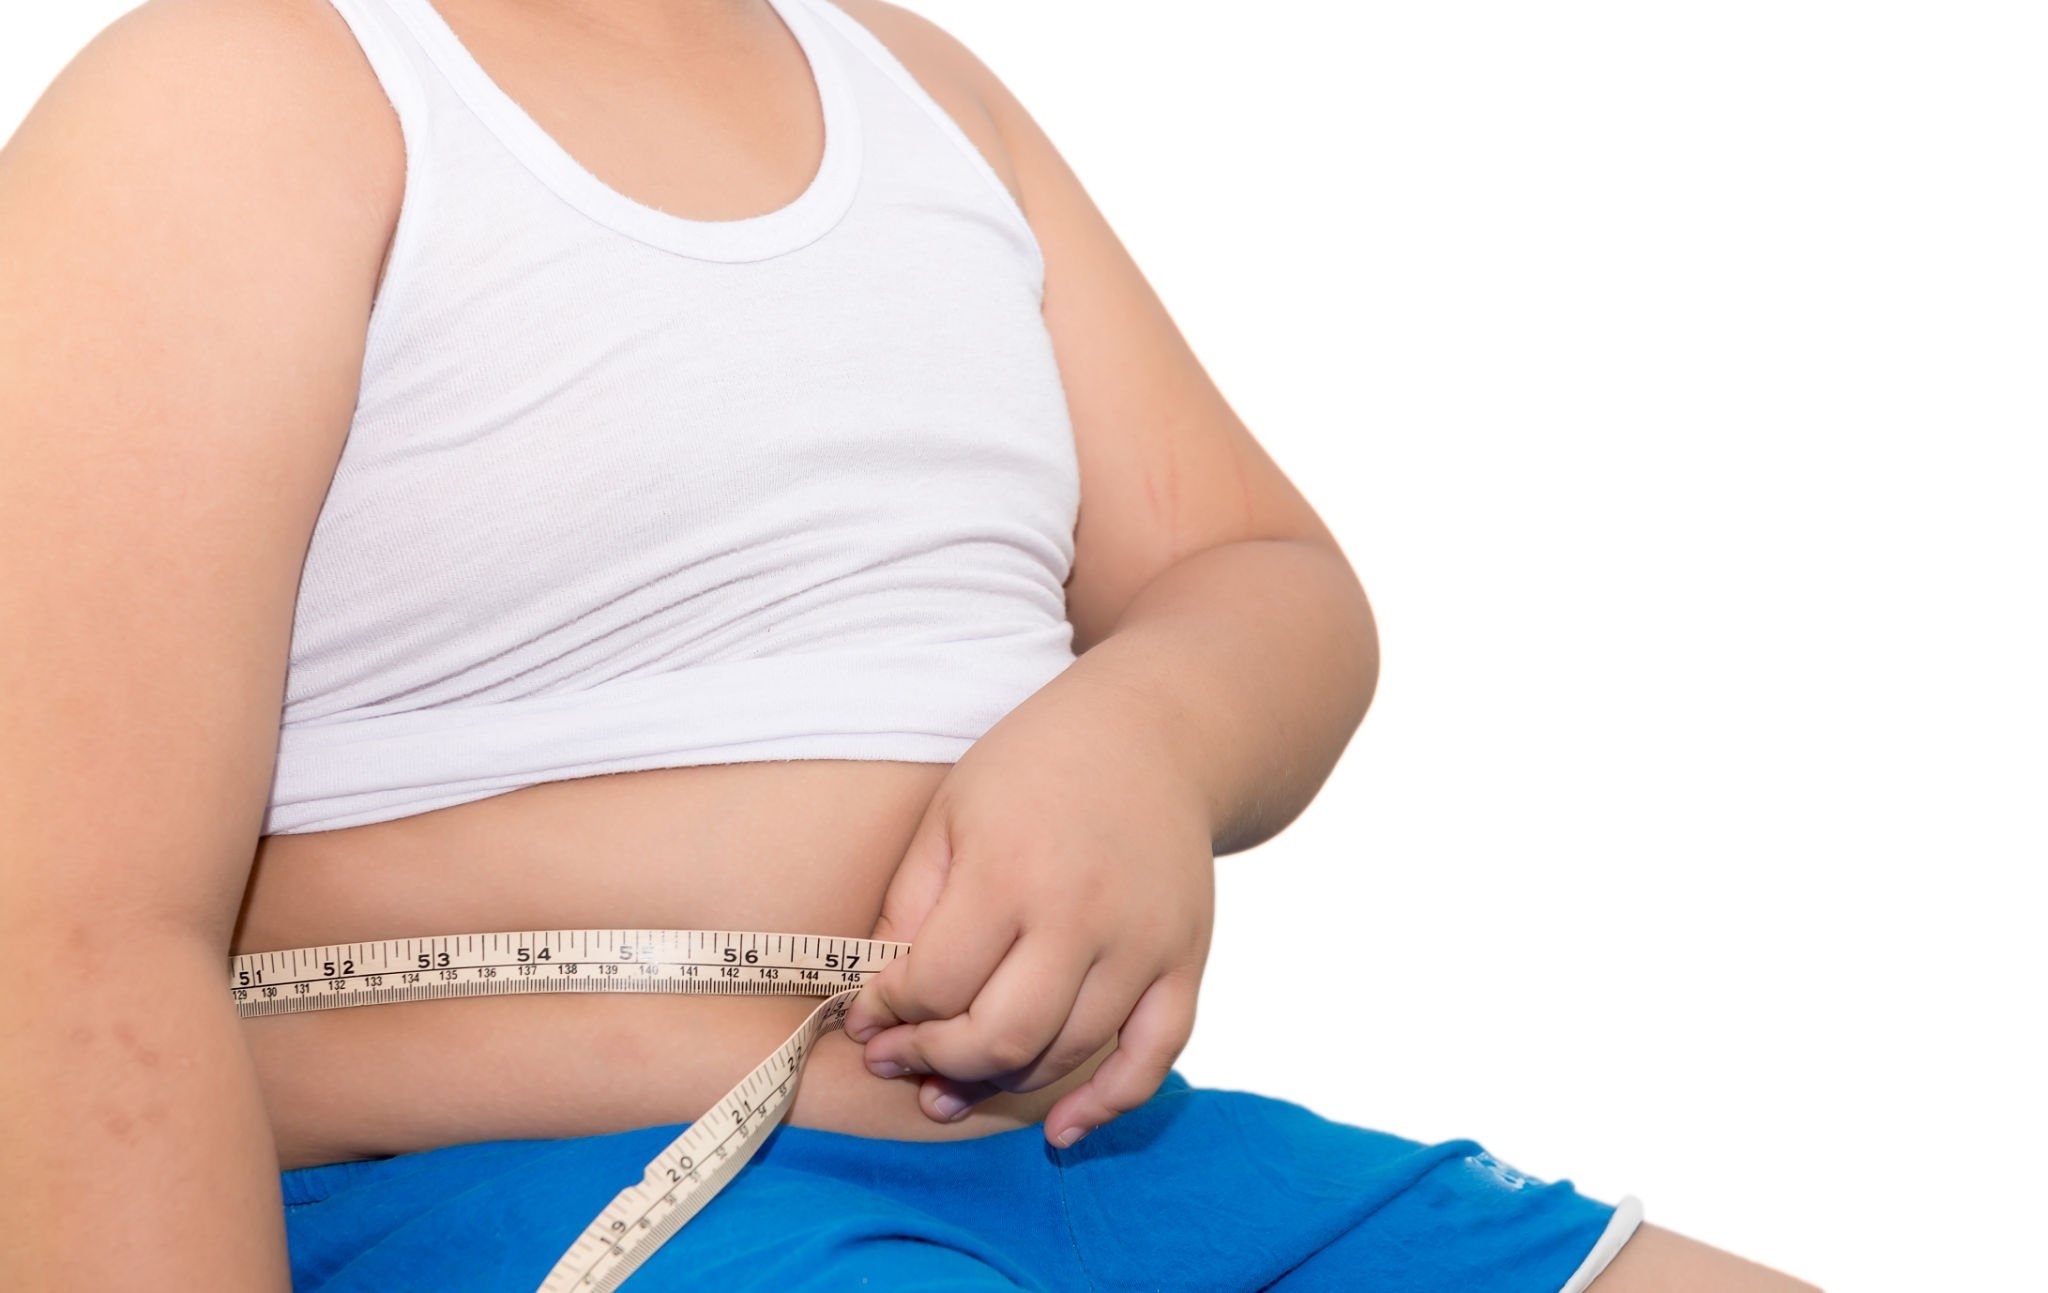 How Do I Know If My Child Is Overweight or Obese?